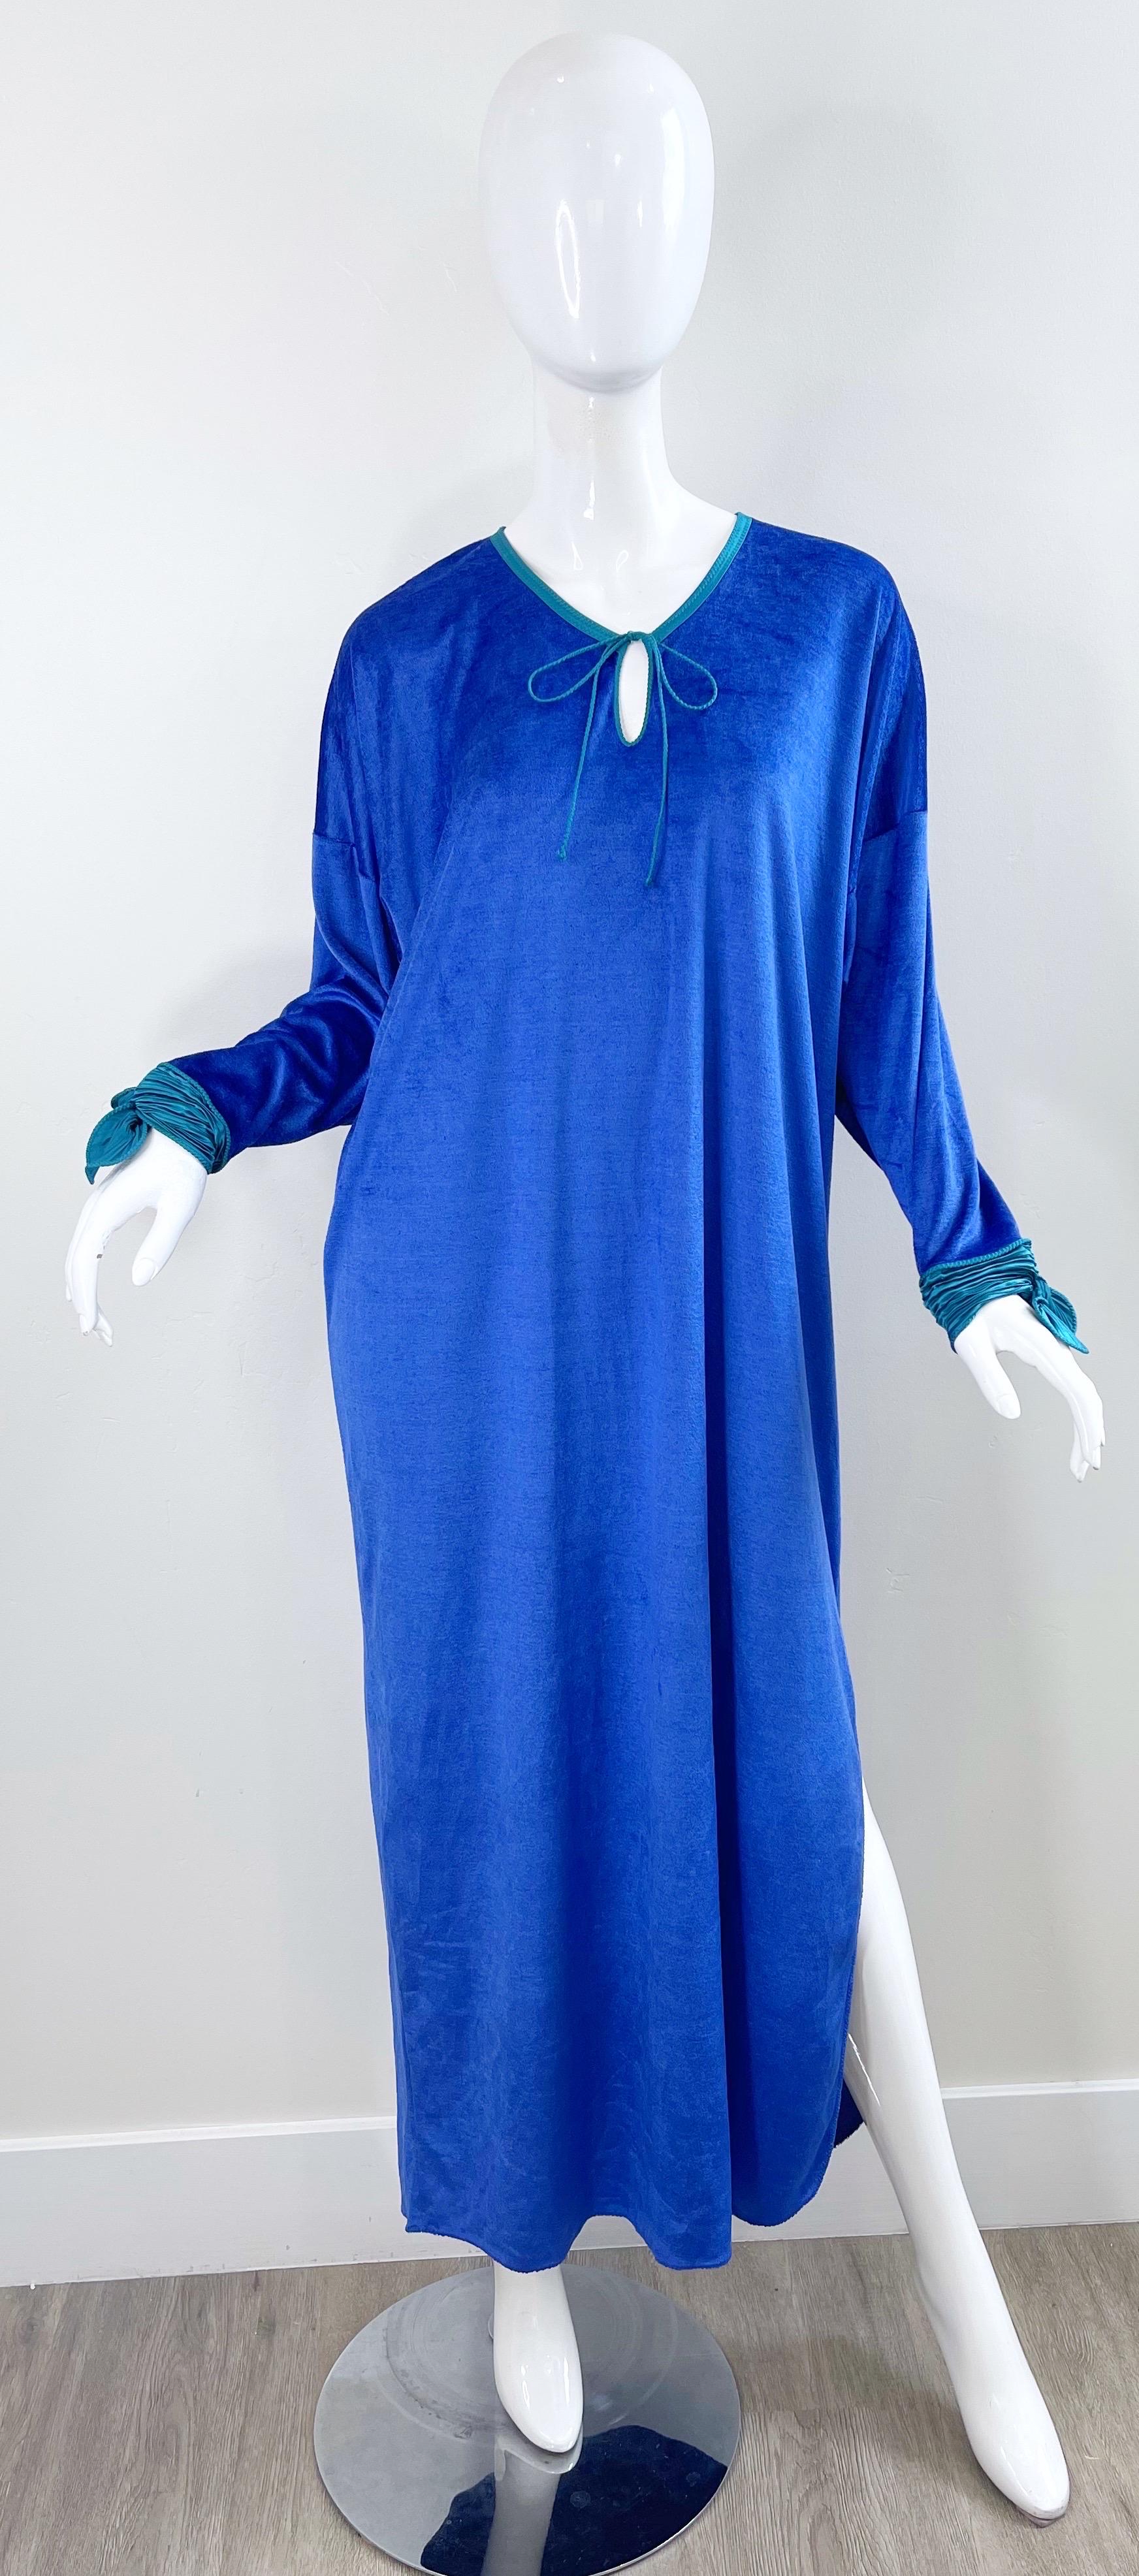 1980s Mary McFadden Royal Blue Teal Velour Vintage 80s Caftan Maxi Dress Kaftan In Excellent Condition For Sale In San Diego, CA